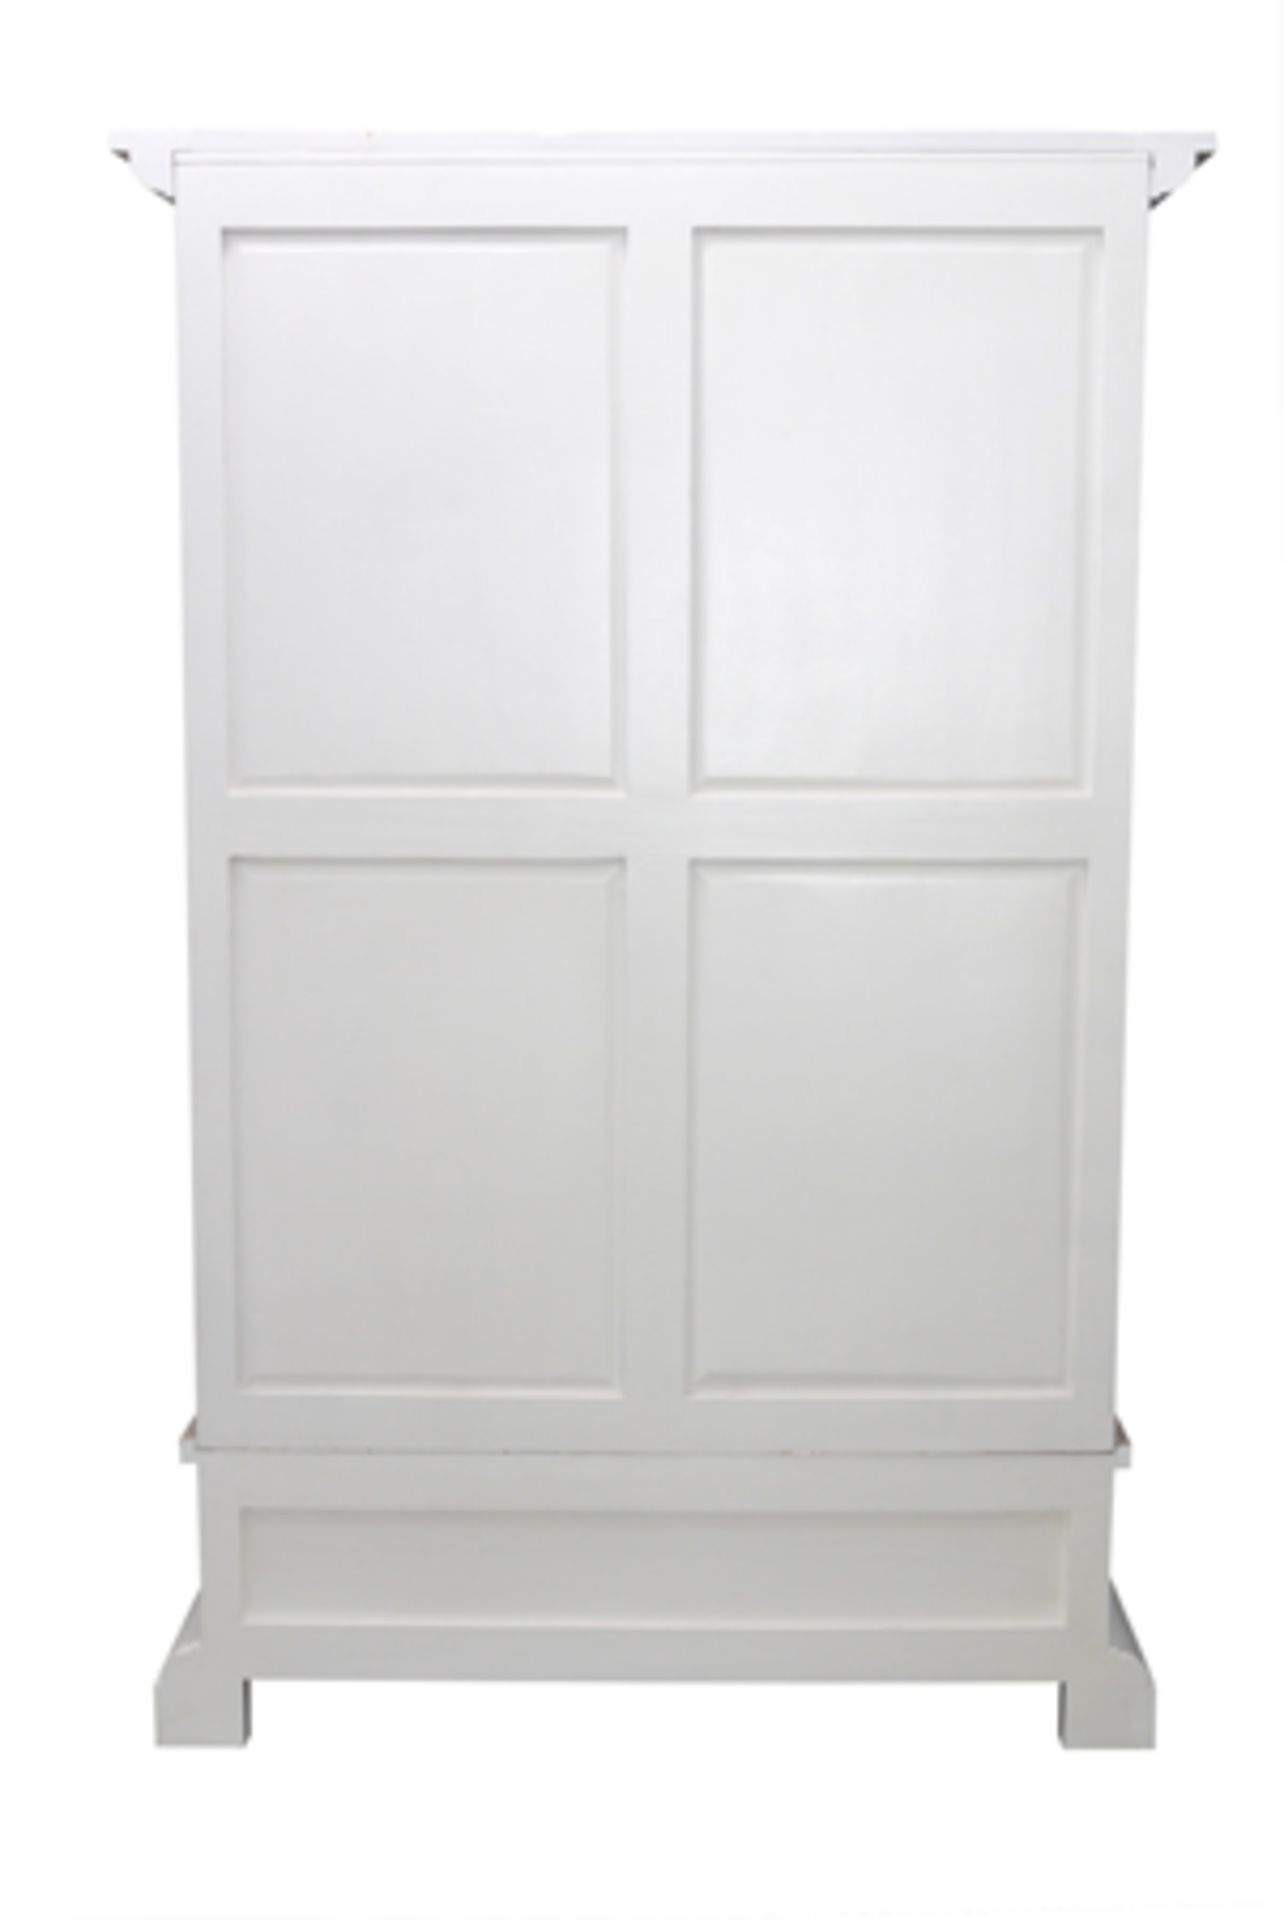 Cottonwood Wardrobe 2 Door Antique White The Cottonwood Finish Adds A Fresh And Tranquil Appeal To - Image 3 of 4